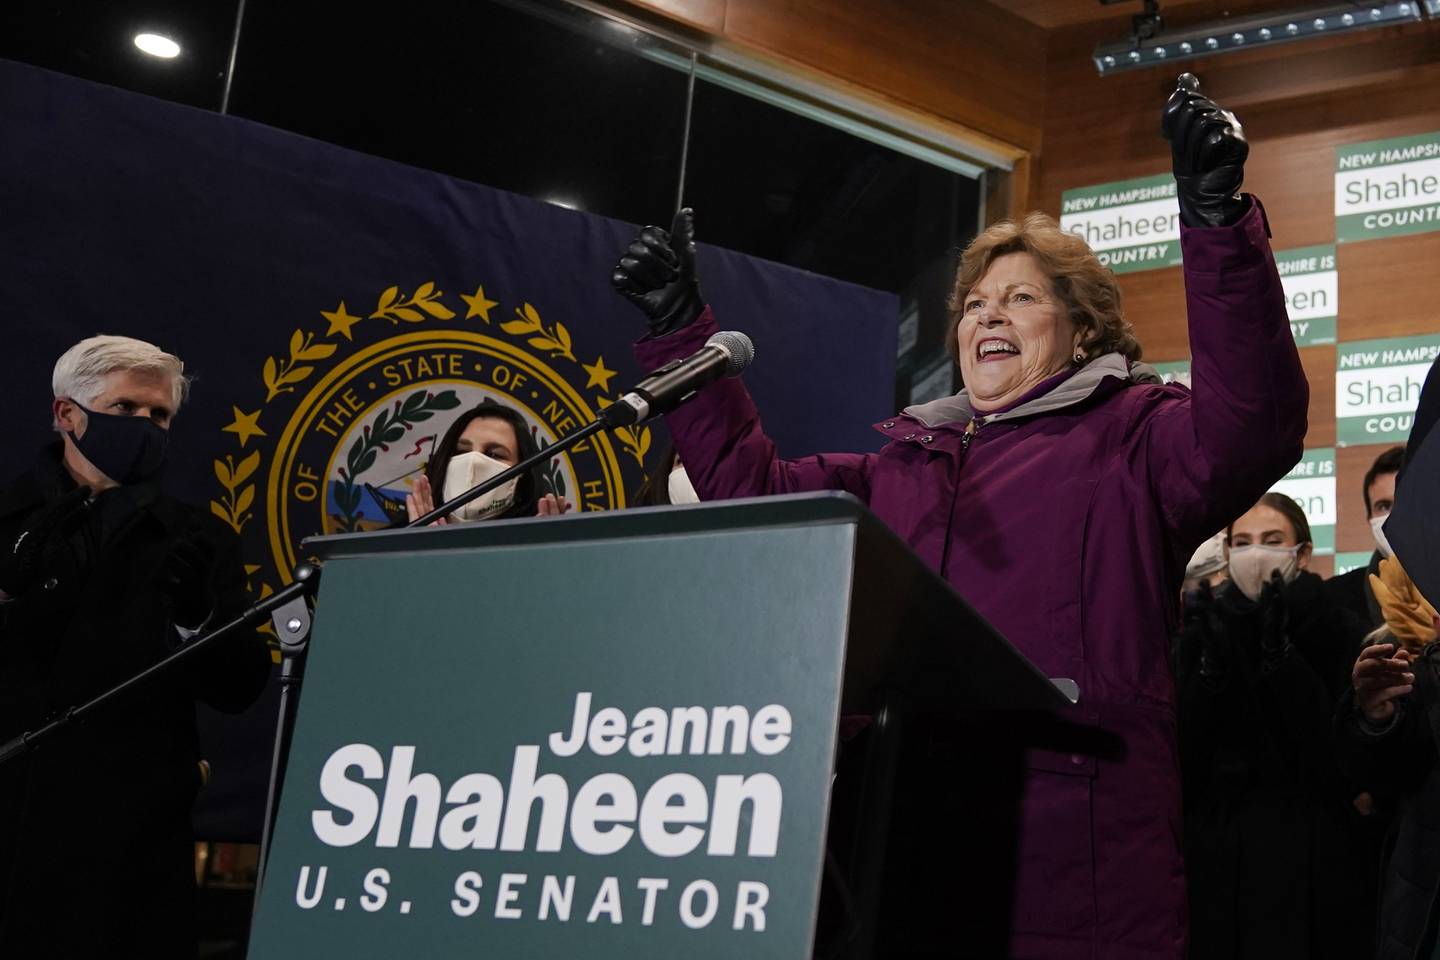 Incumbent U.S. Sen. Jeanne Shaheen, D-N.H., raises her arms after claiming victory at a gathering with supporters, Tuesday, Nov. 3, 2020, in Manchester, N.H. Shaheen faced Republican businessman Corky Messner. (AP Photo/Charles Krupa)